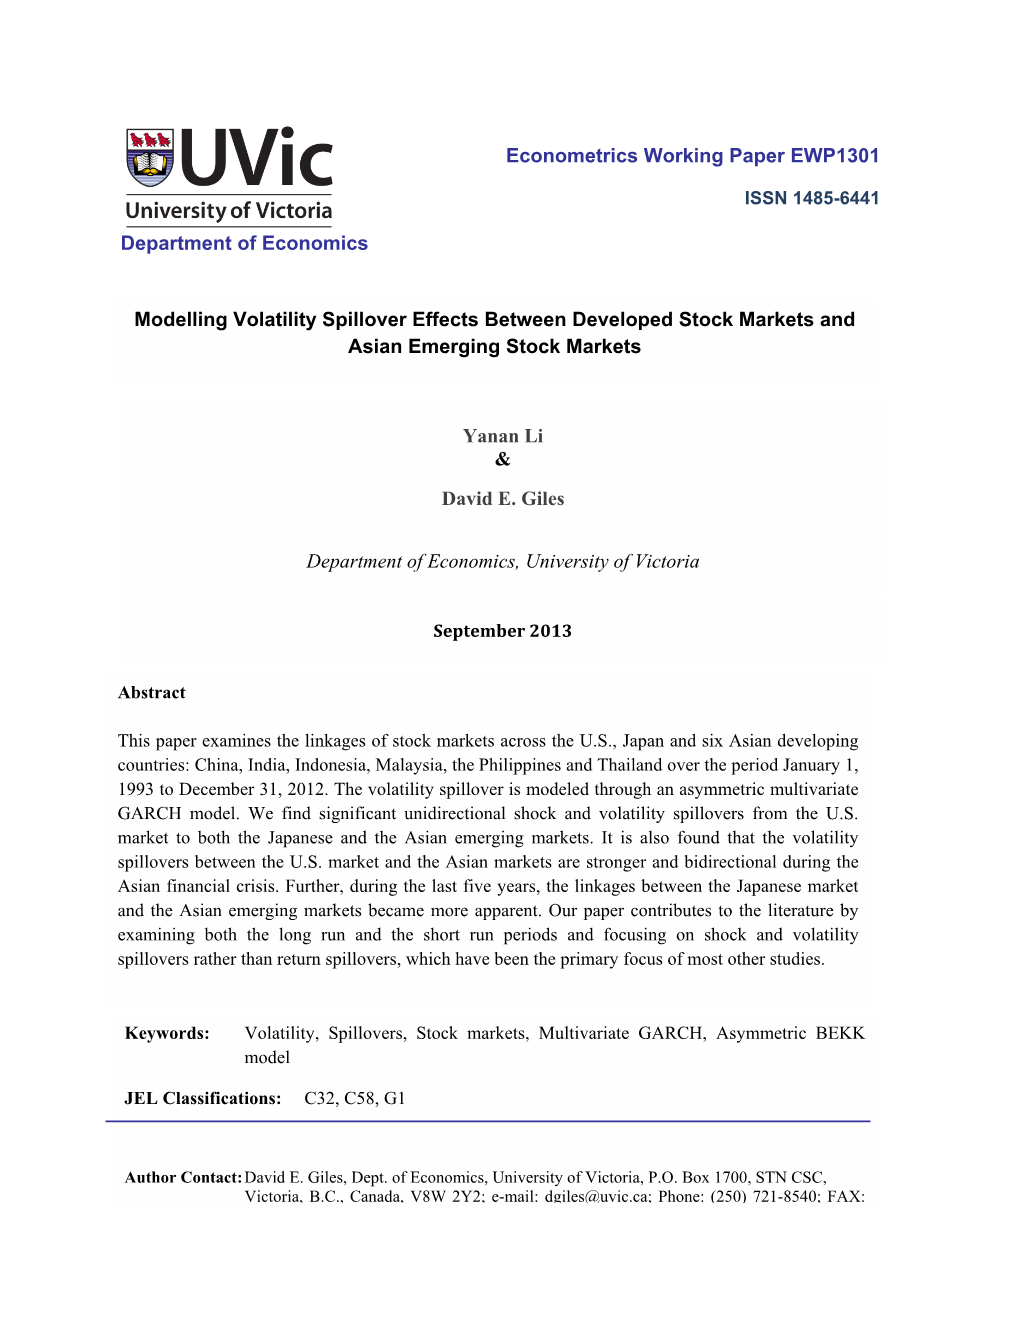 Modelling Volatility Spillover Effects Between Developed Stock Markets and Asian Emerging Stock Markets